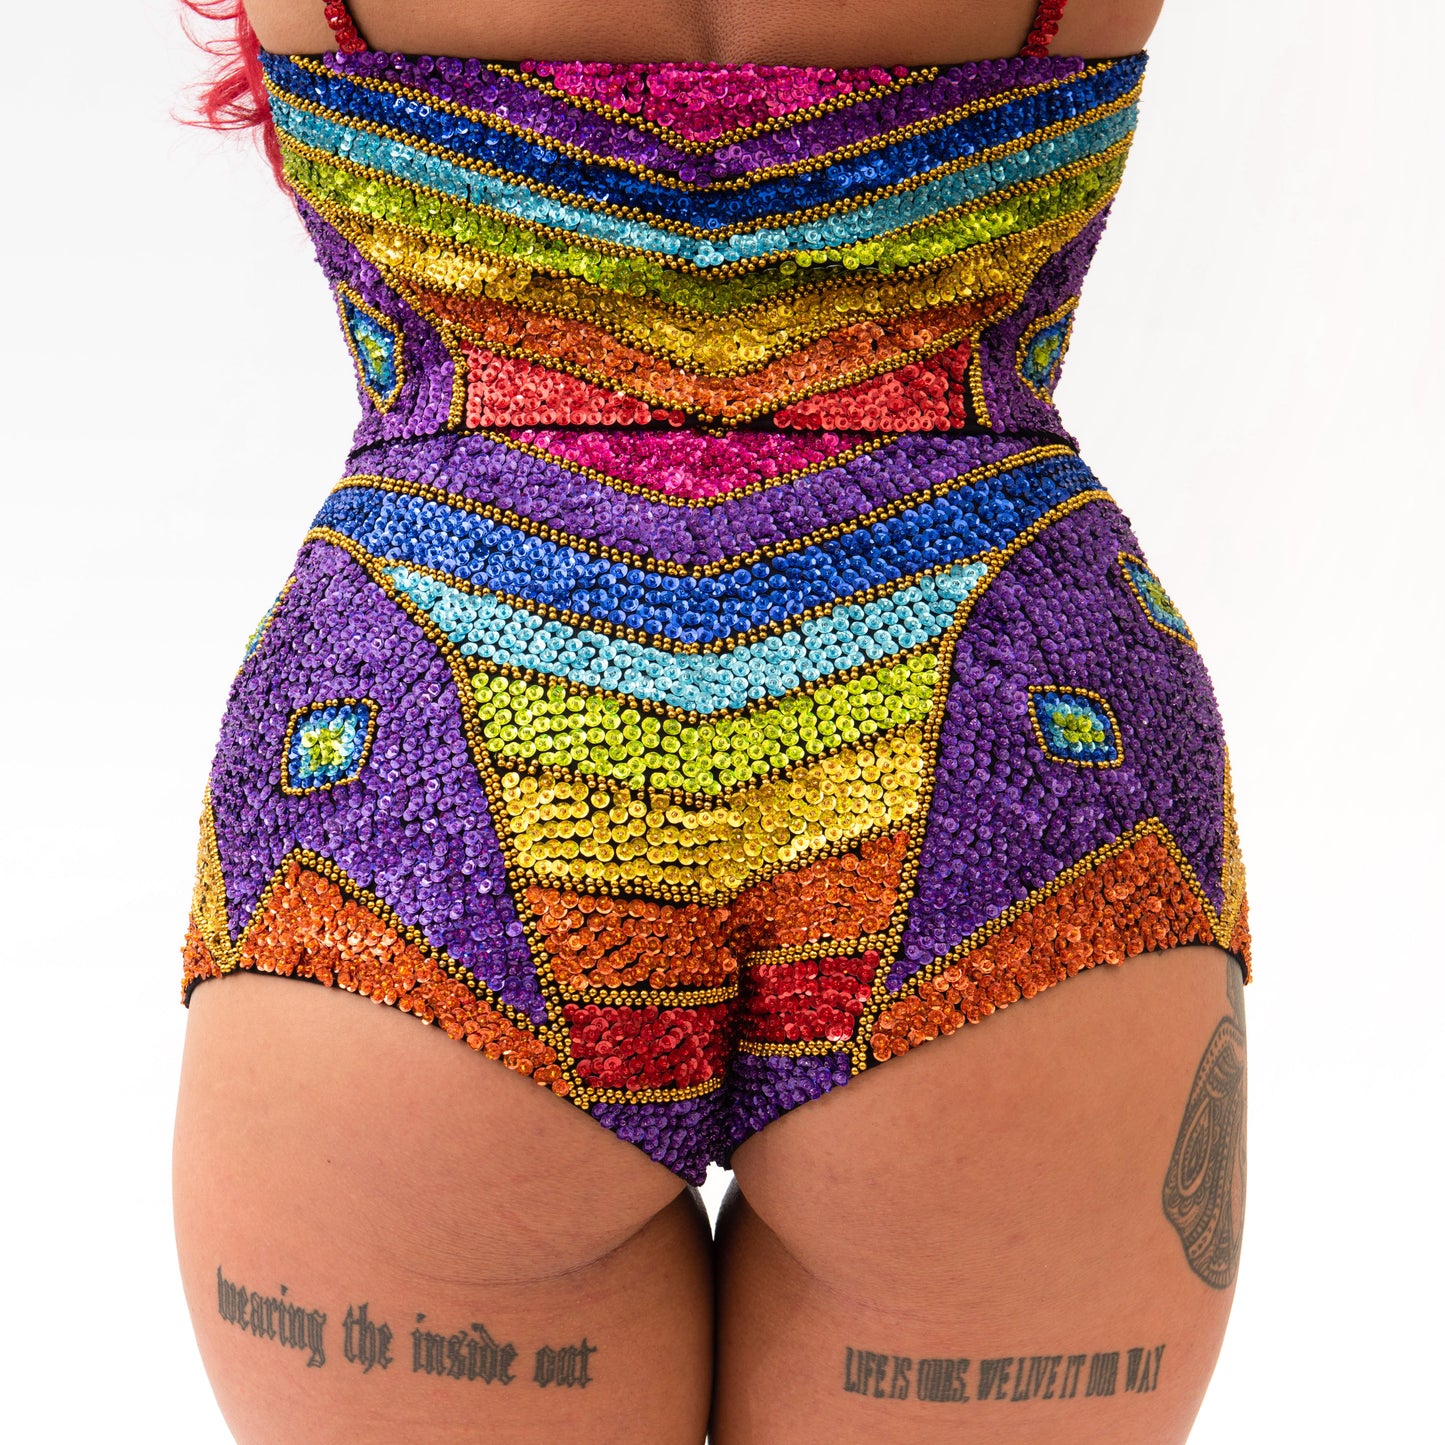 Rainbow bottom, high waist ladies festival shorts, sequin hot pants, rainbow shorts, festival bottoms and pants for gay pride costume or festival outfit.